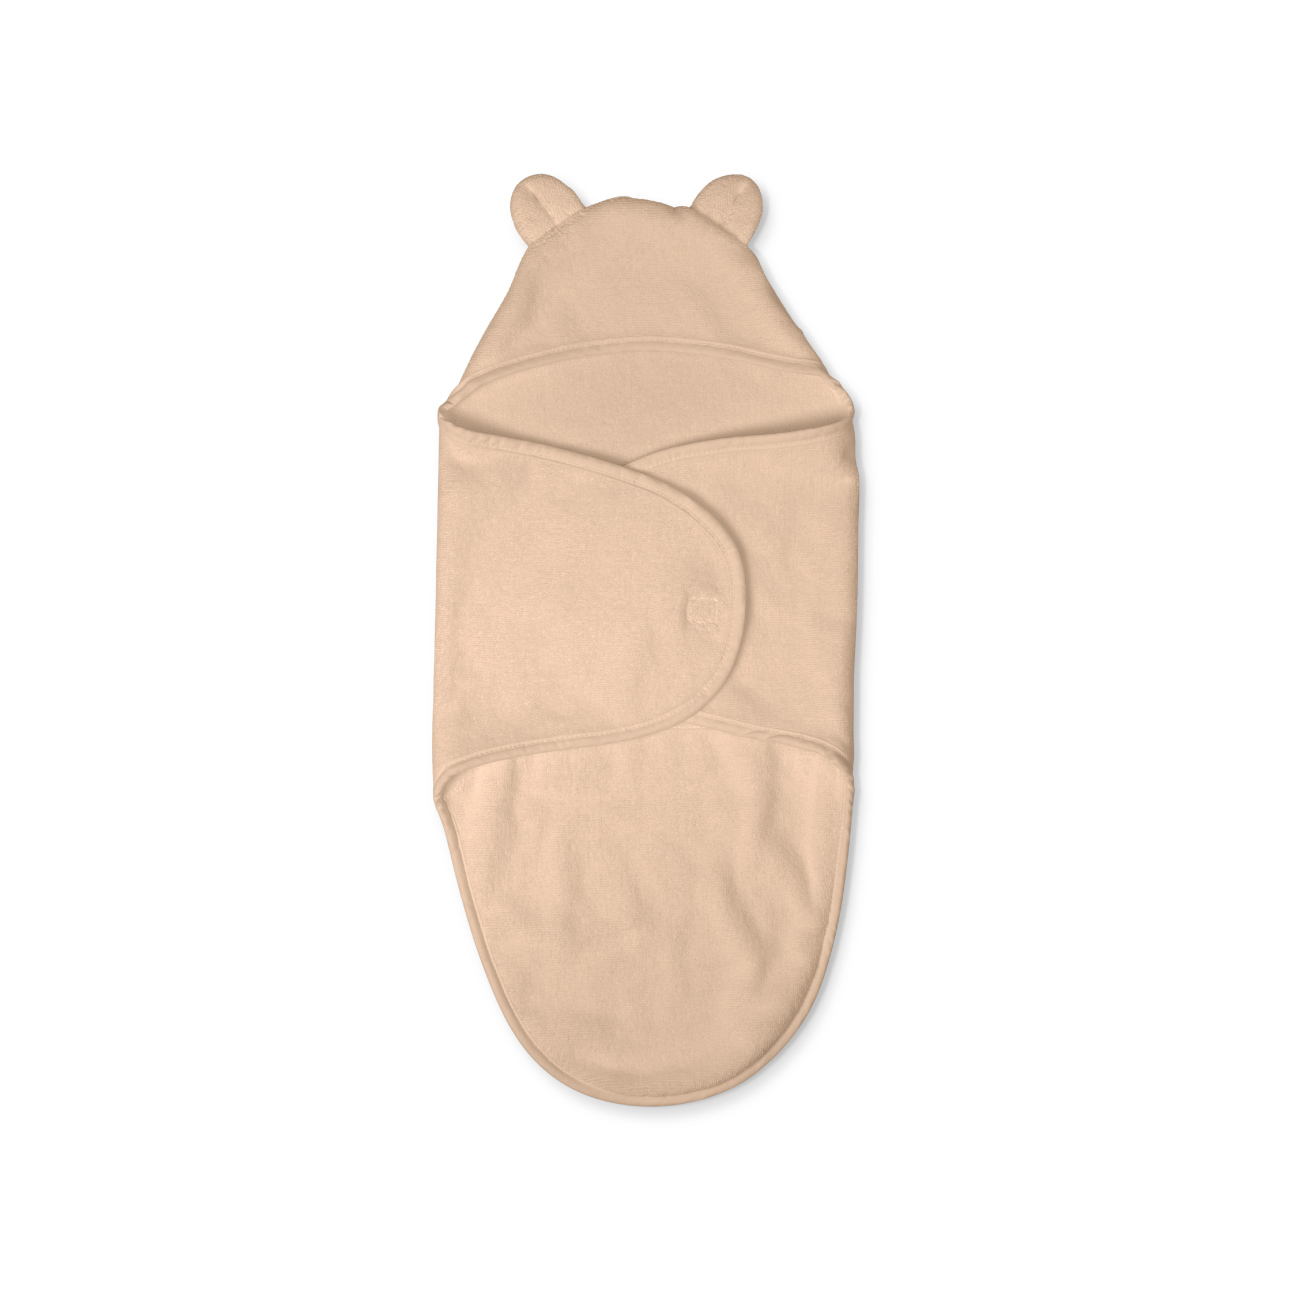 That's Mine - Towel Swaddle - Dusty Rose (HT4005)